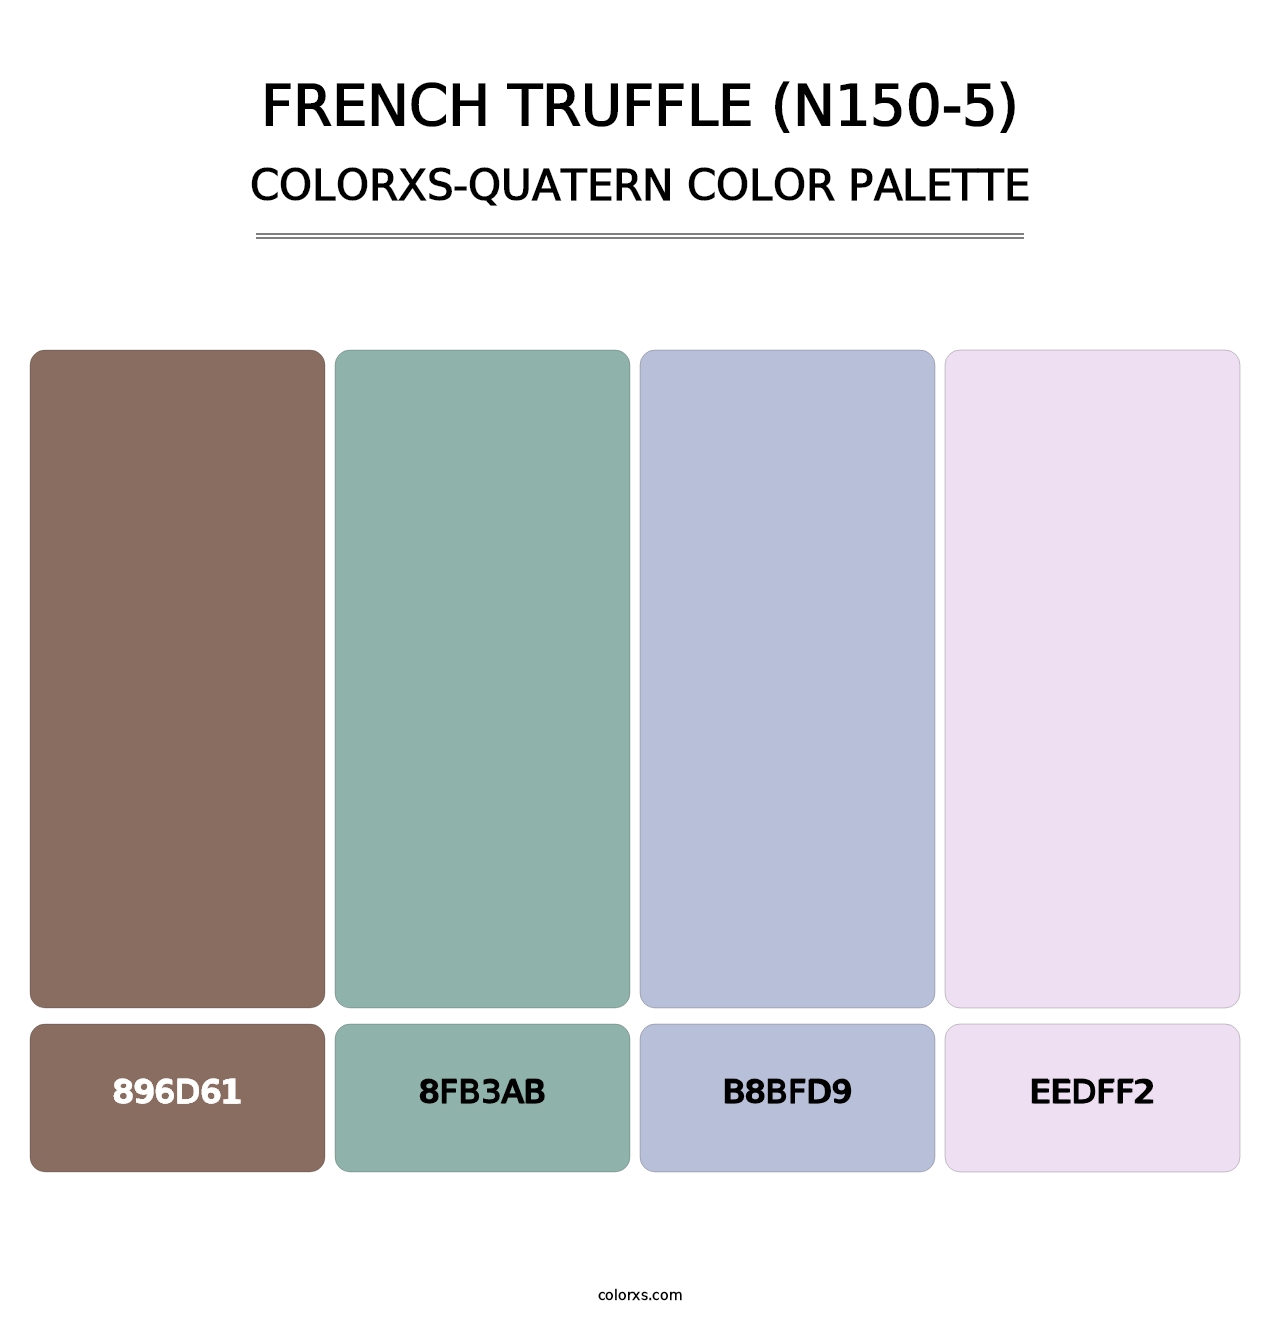 French Truffle (N150-5) - Colorxs Quatern Palette